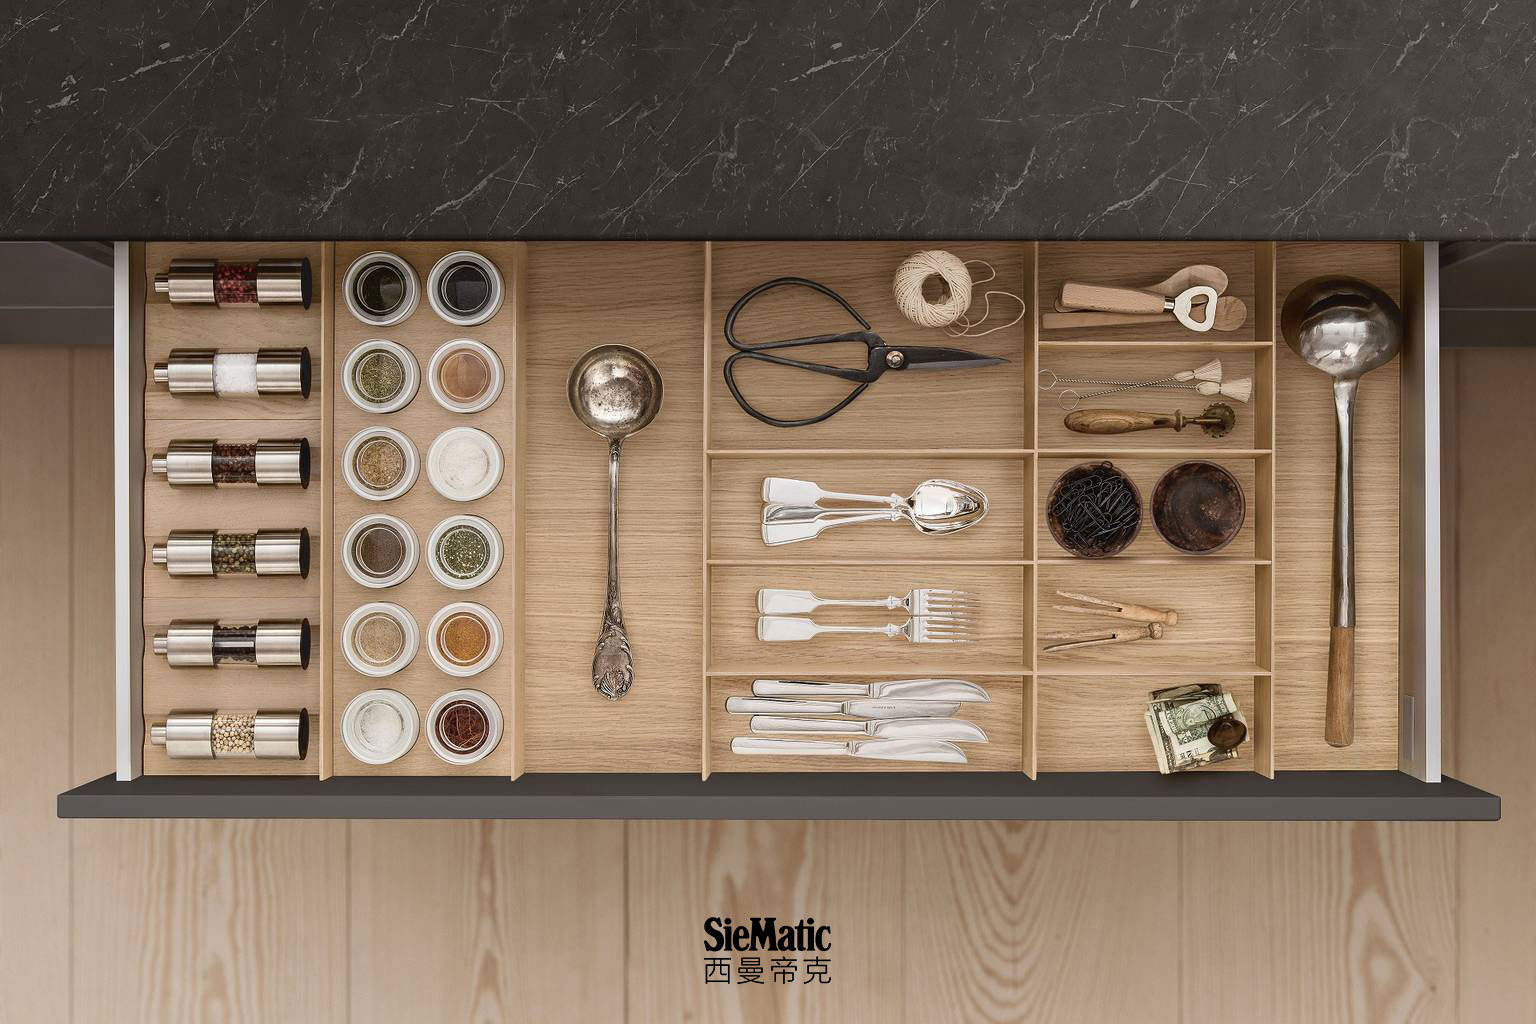 Cutlery, spice mills and porcelain jars in drawer with SieMatic kitchen interior accessories